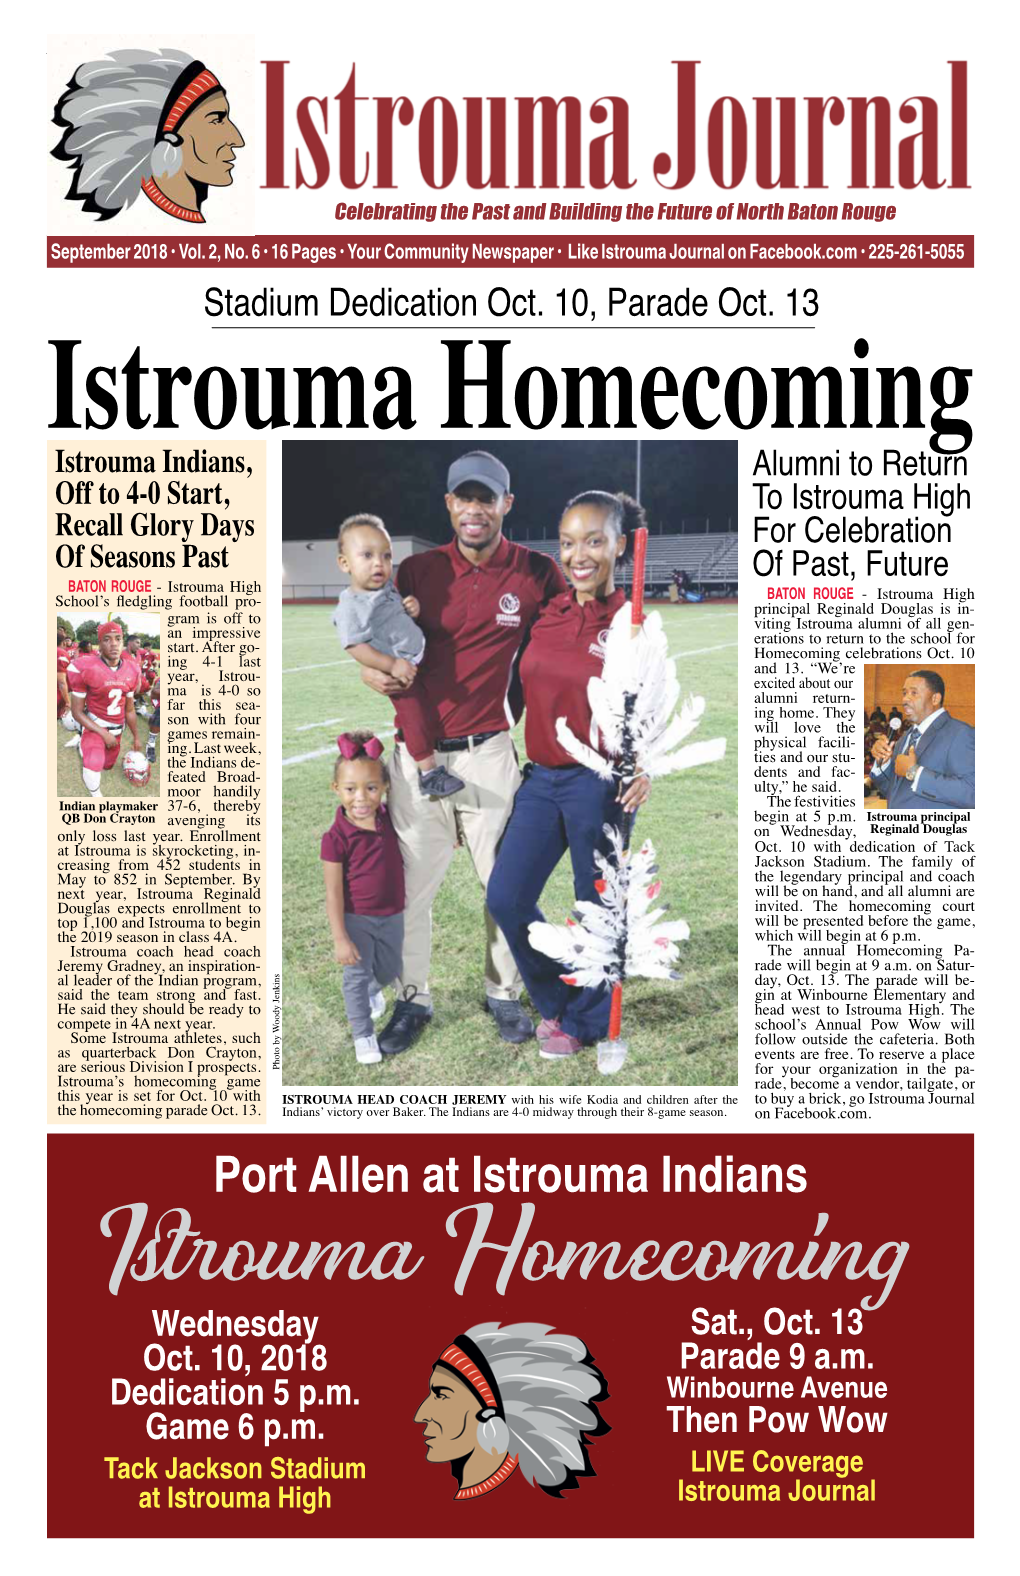 Port Allen at Istrouma Indians Istrouma Homecoming Wednesday Sat., Oct